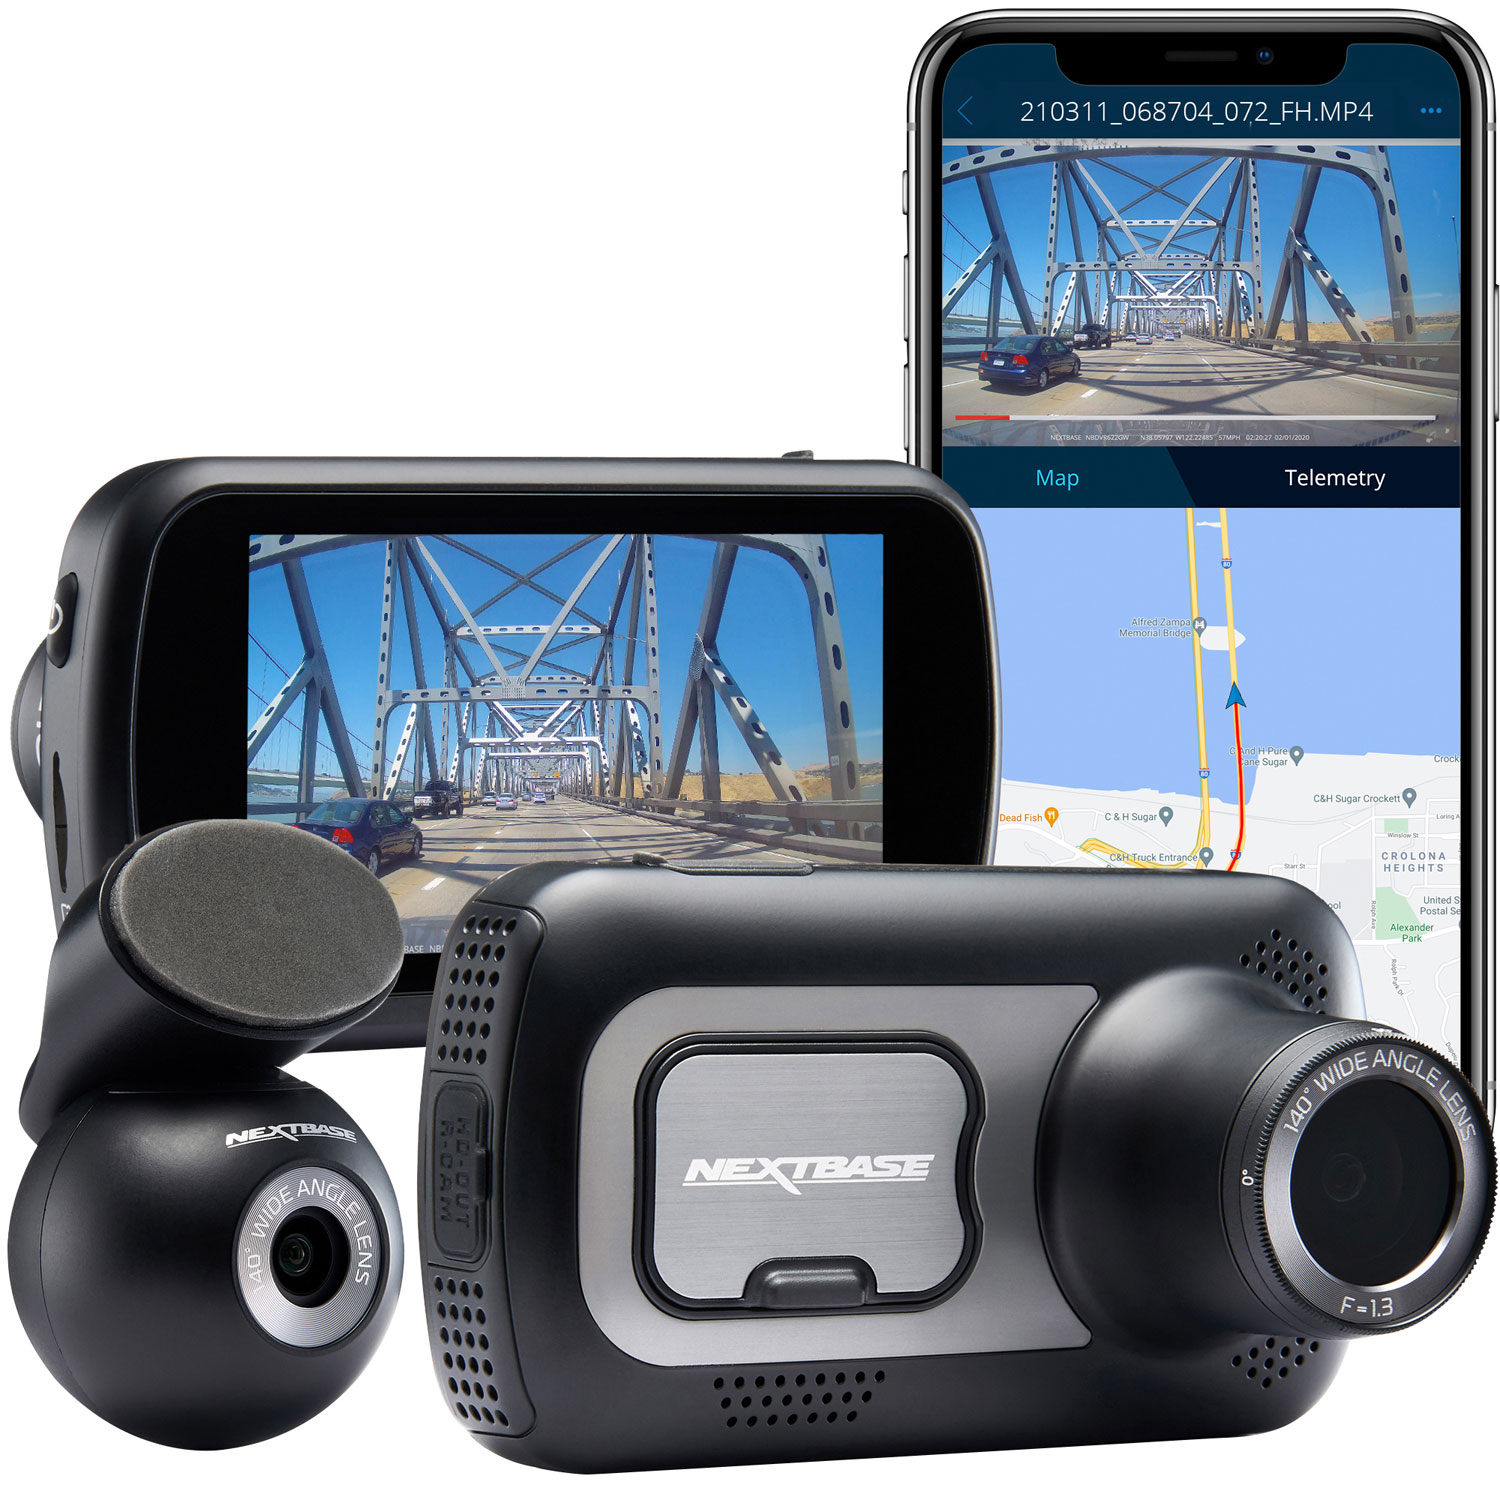 Nextbase 522XR 1440p QHD Dash Cam with Rear View Camera - Only at Best Buy